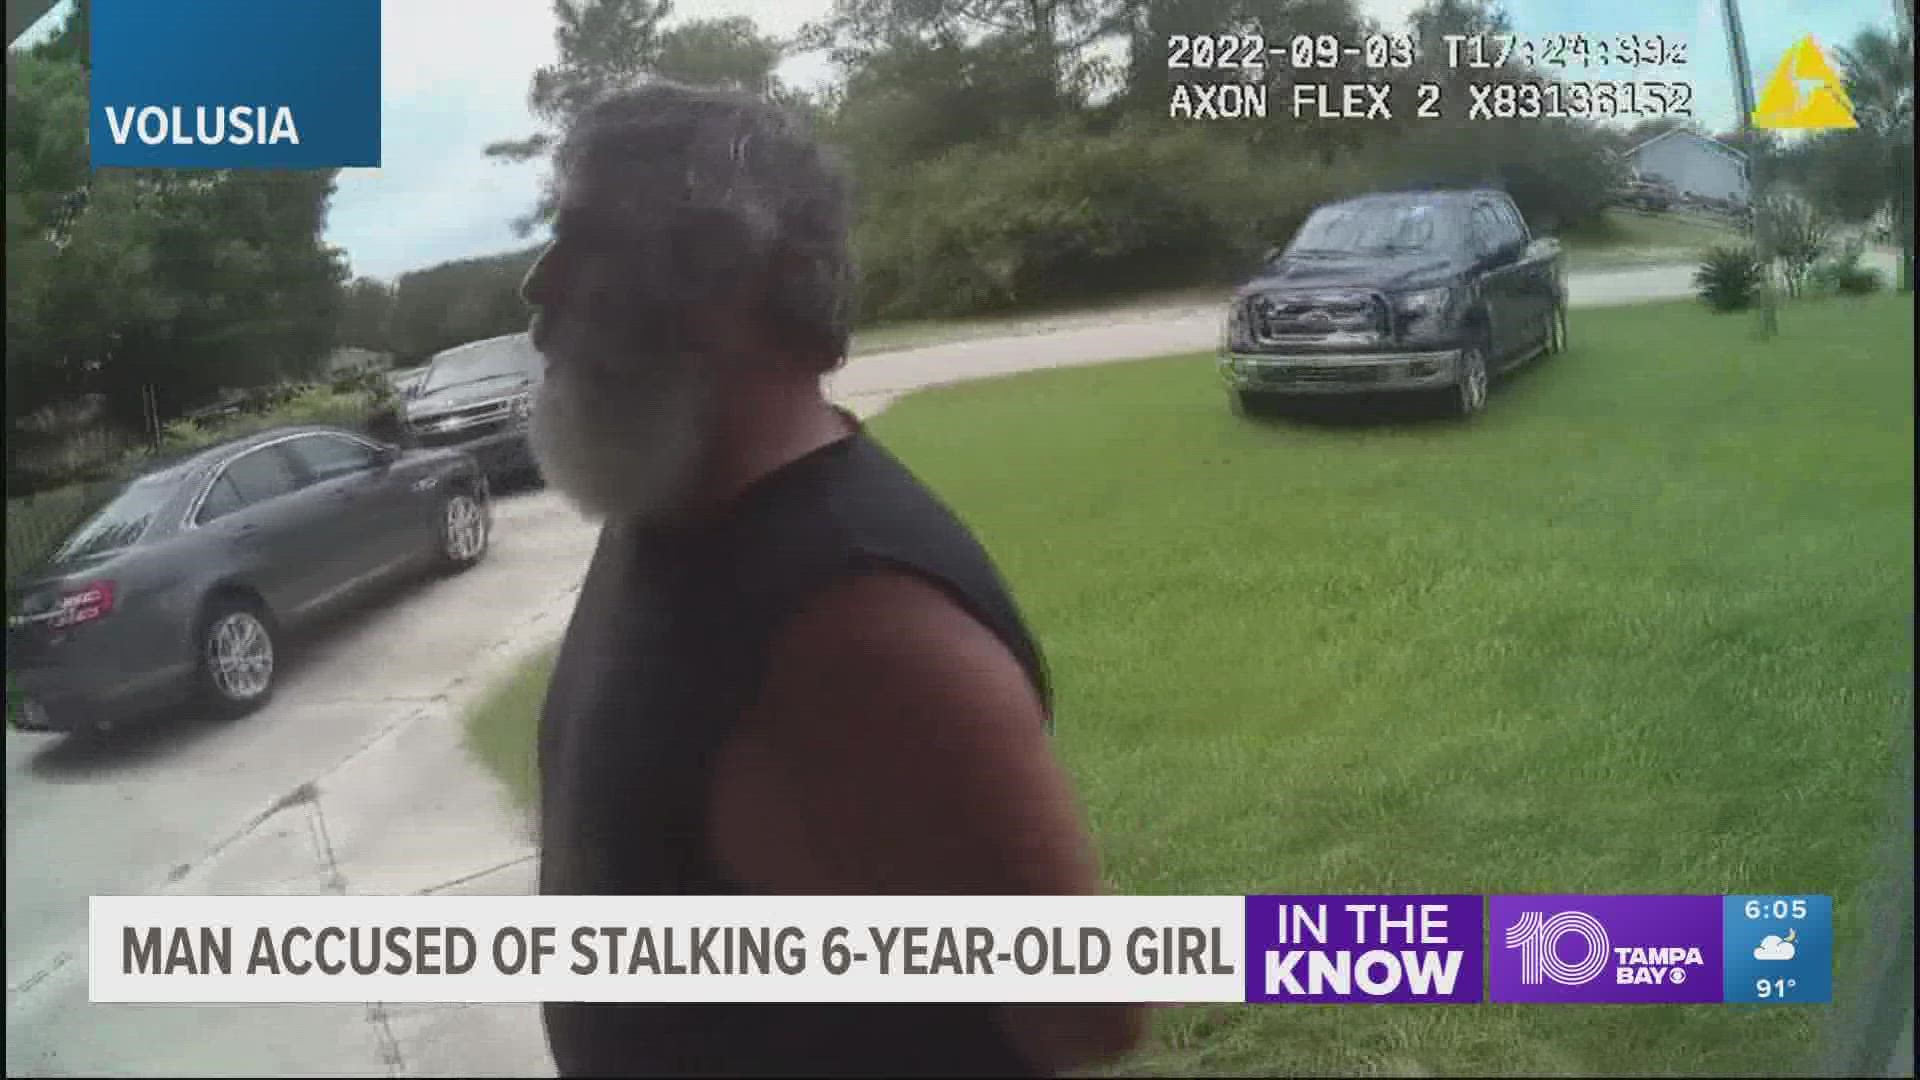 Multiple people have reported he harassed his neighbors and their children, taking photos of them as he drove by. He even drove to the 6-year-old's grandma's house.